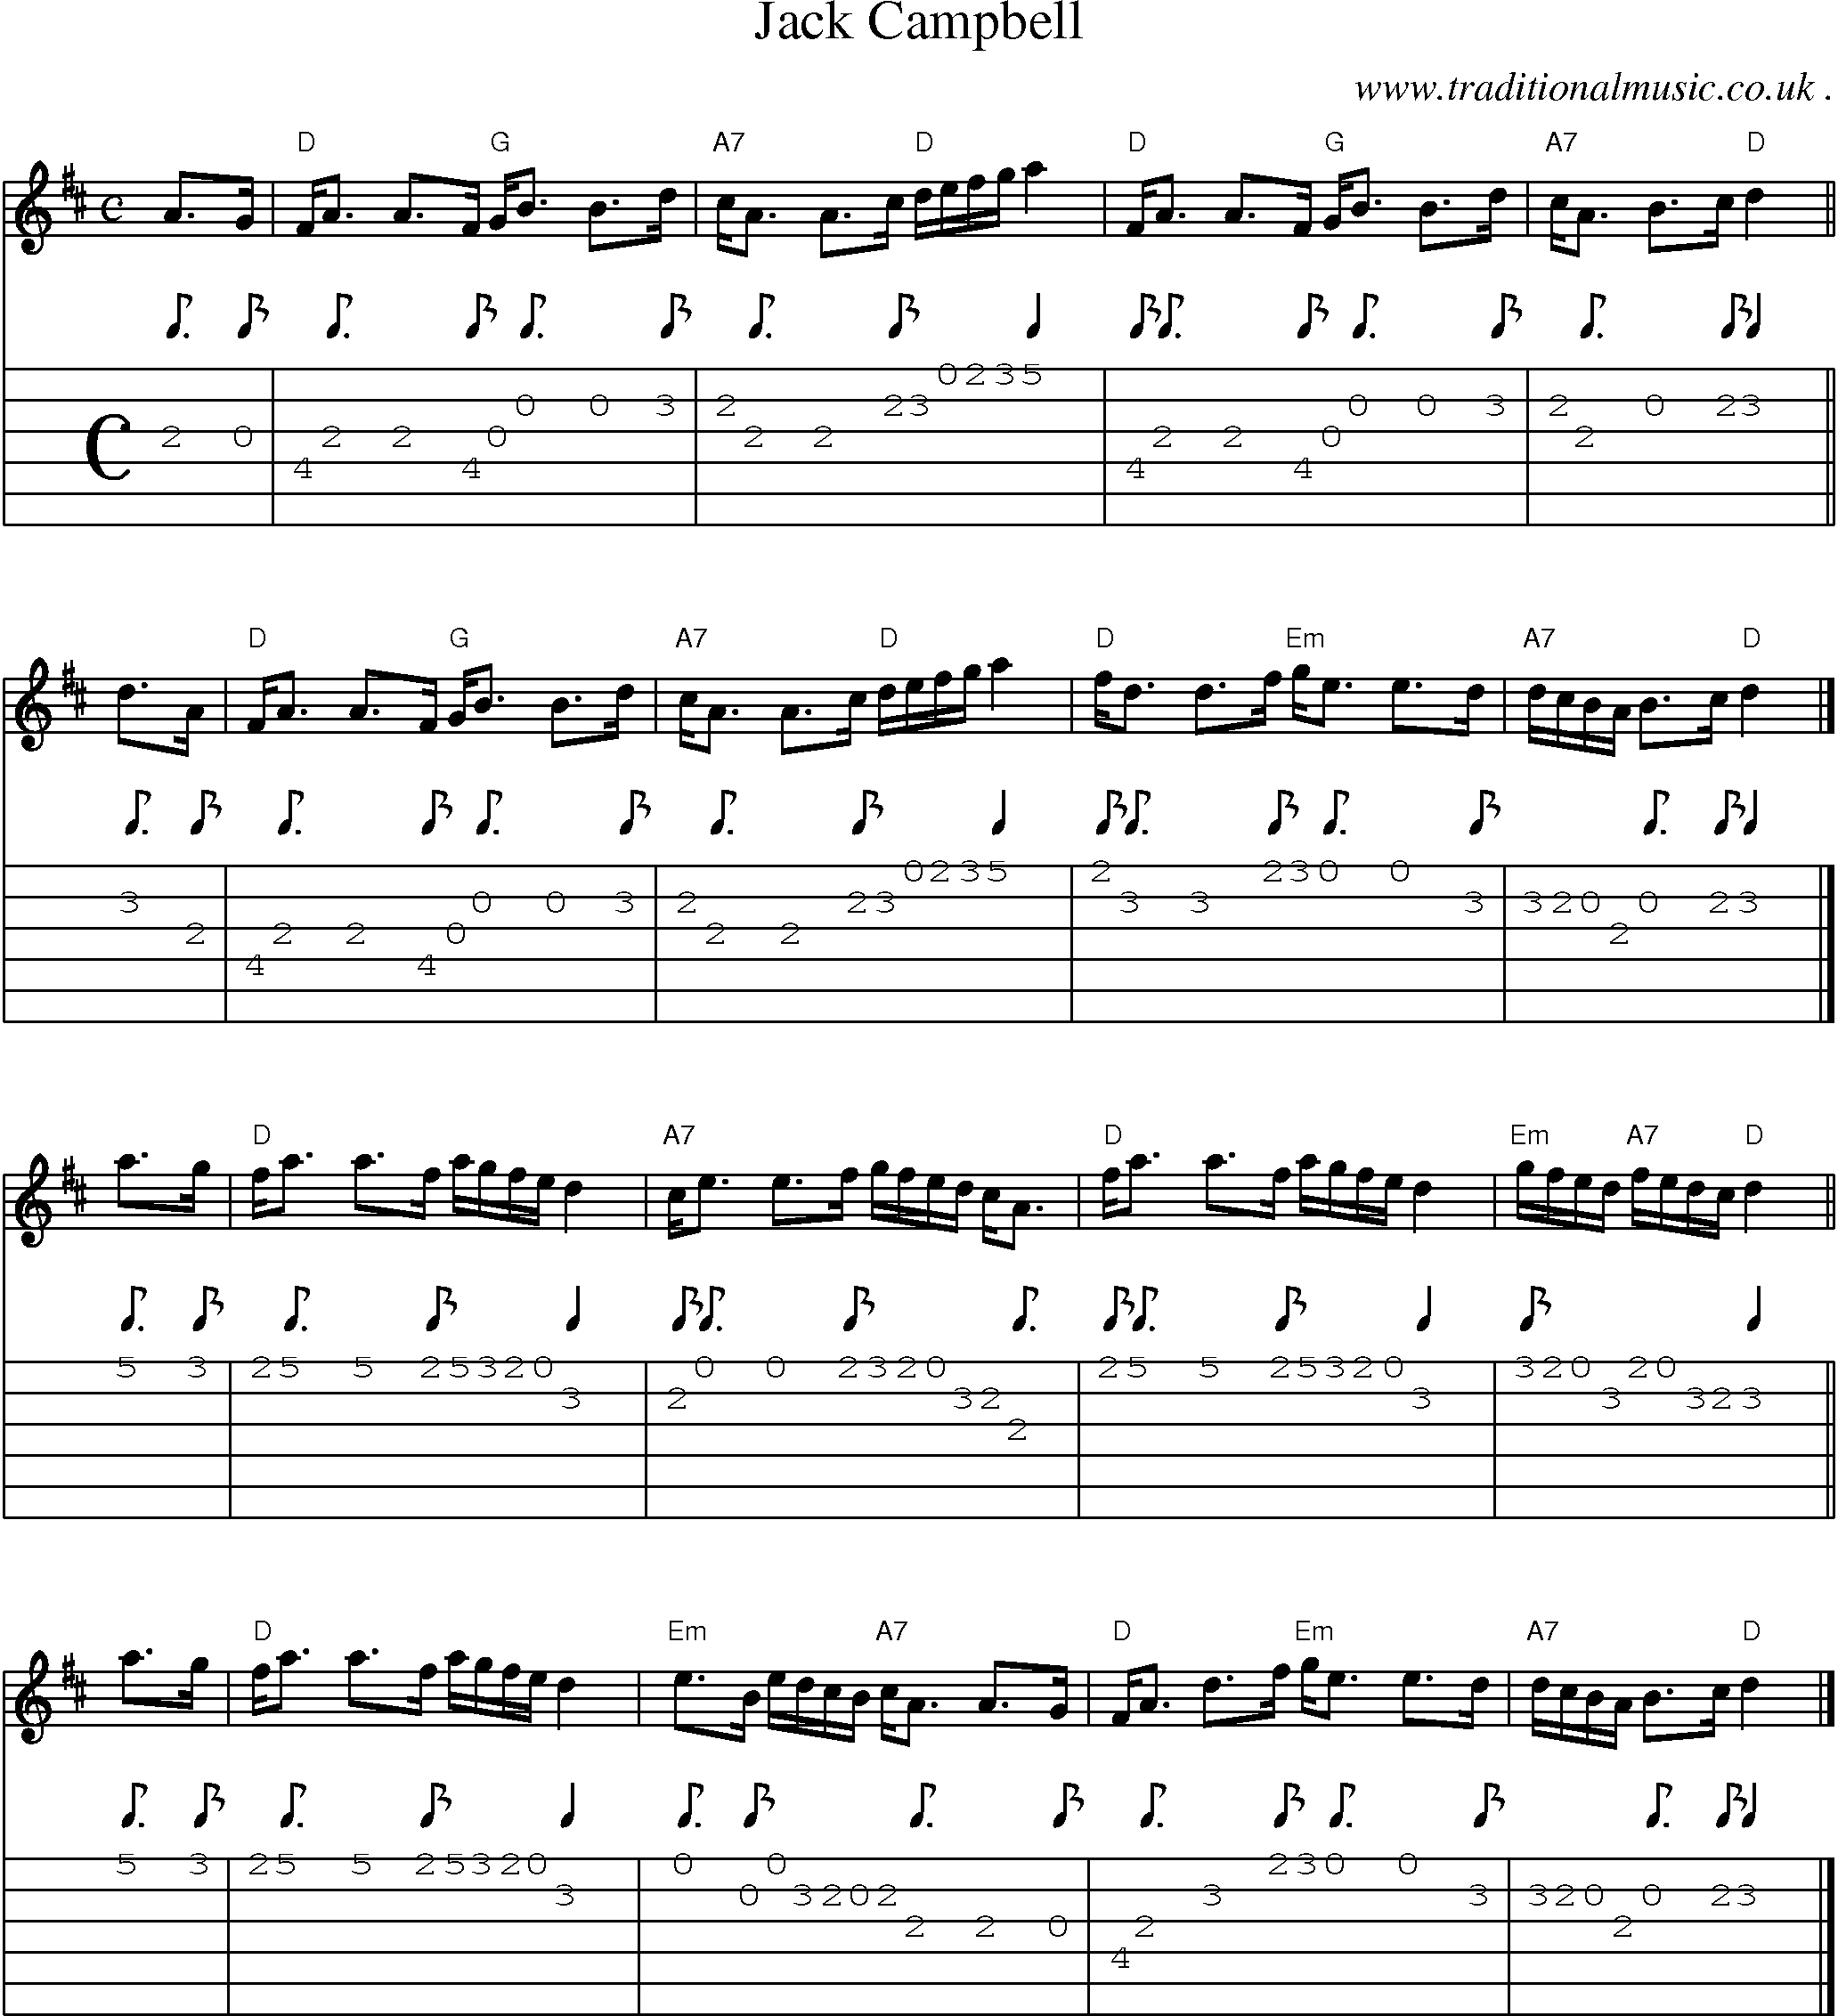 Sheet-music  score, Chords and Guitar Tabs for Jack Campbell